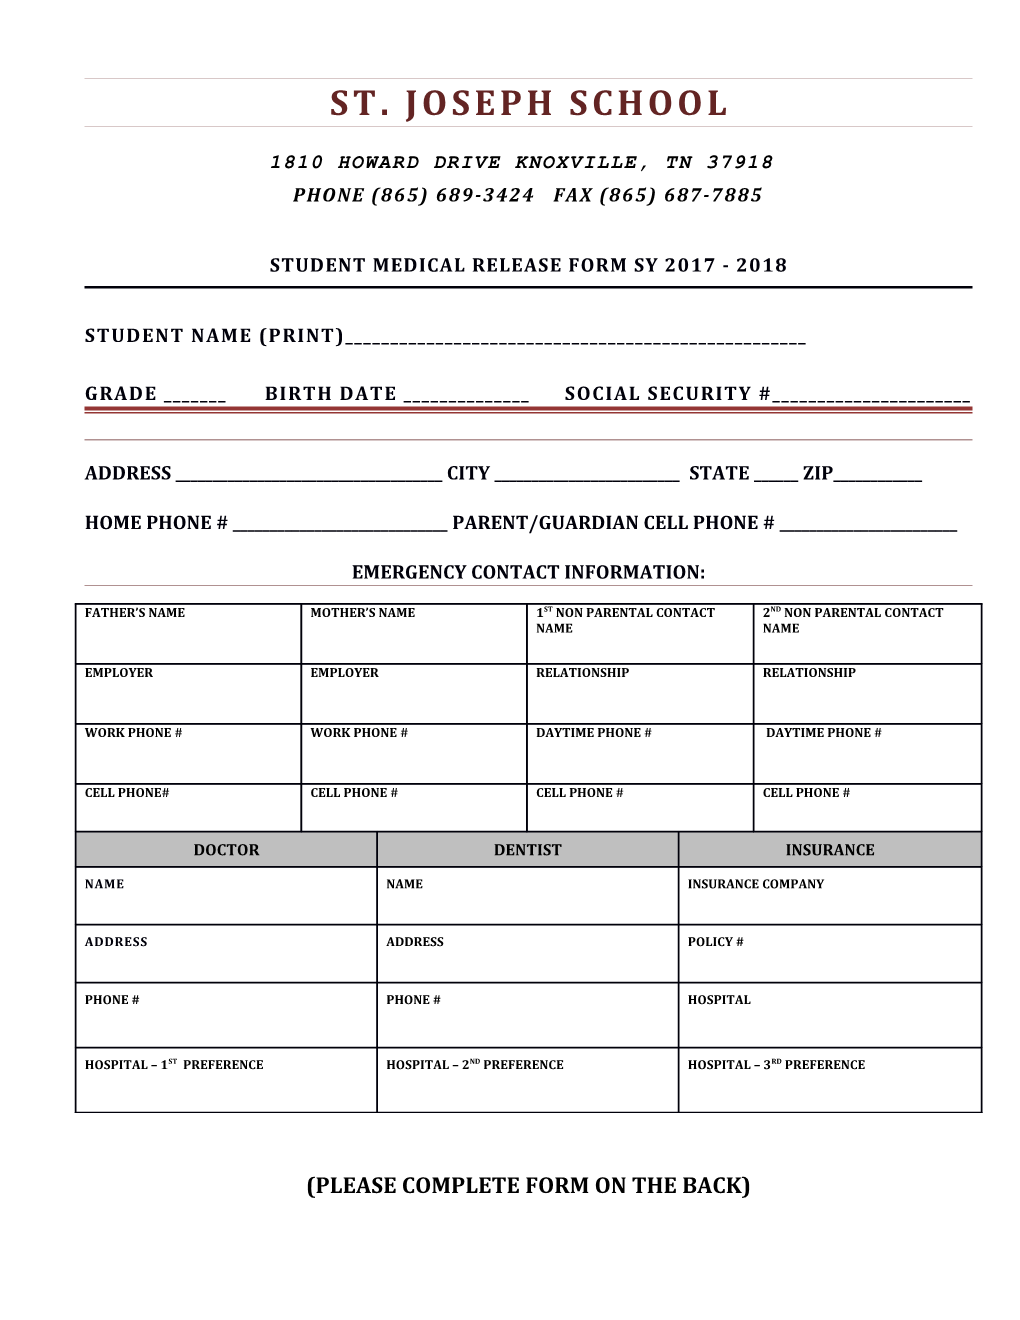 Student MEDICAL RELEASE FORM SY 2017 - 2018